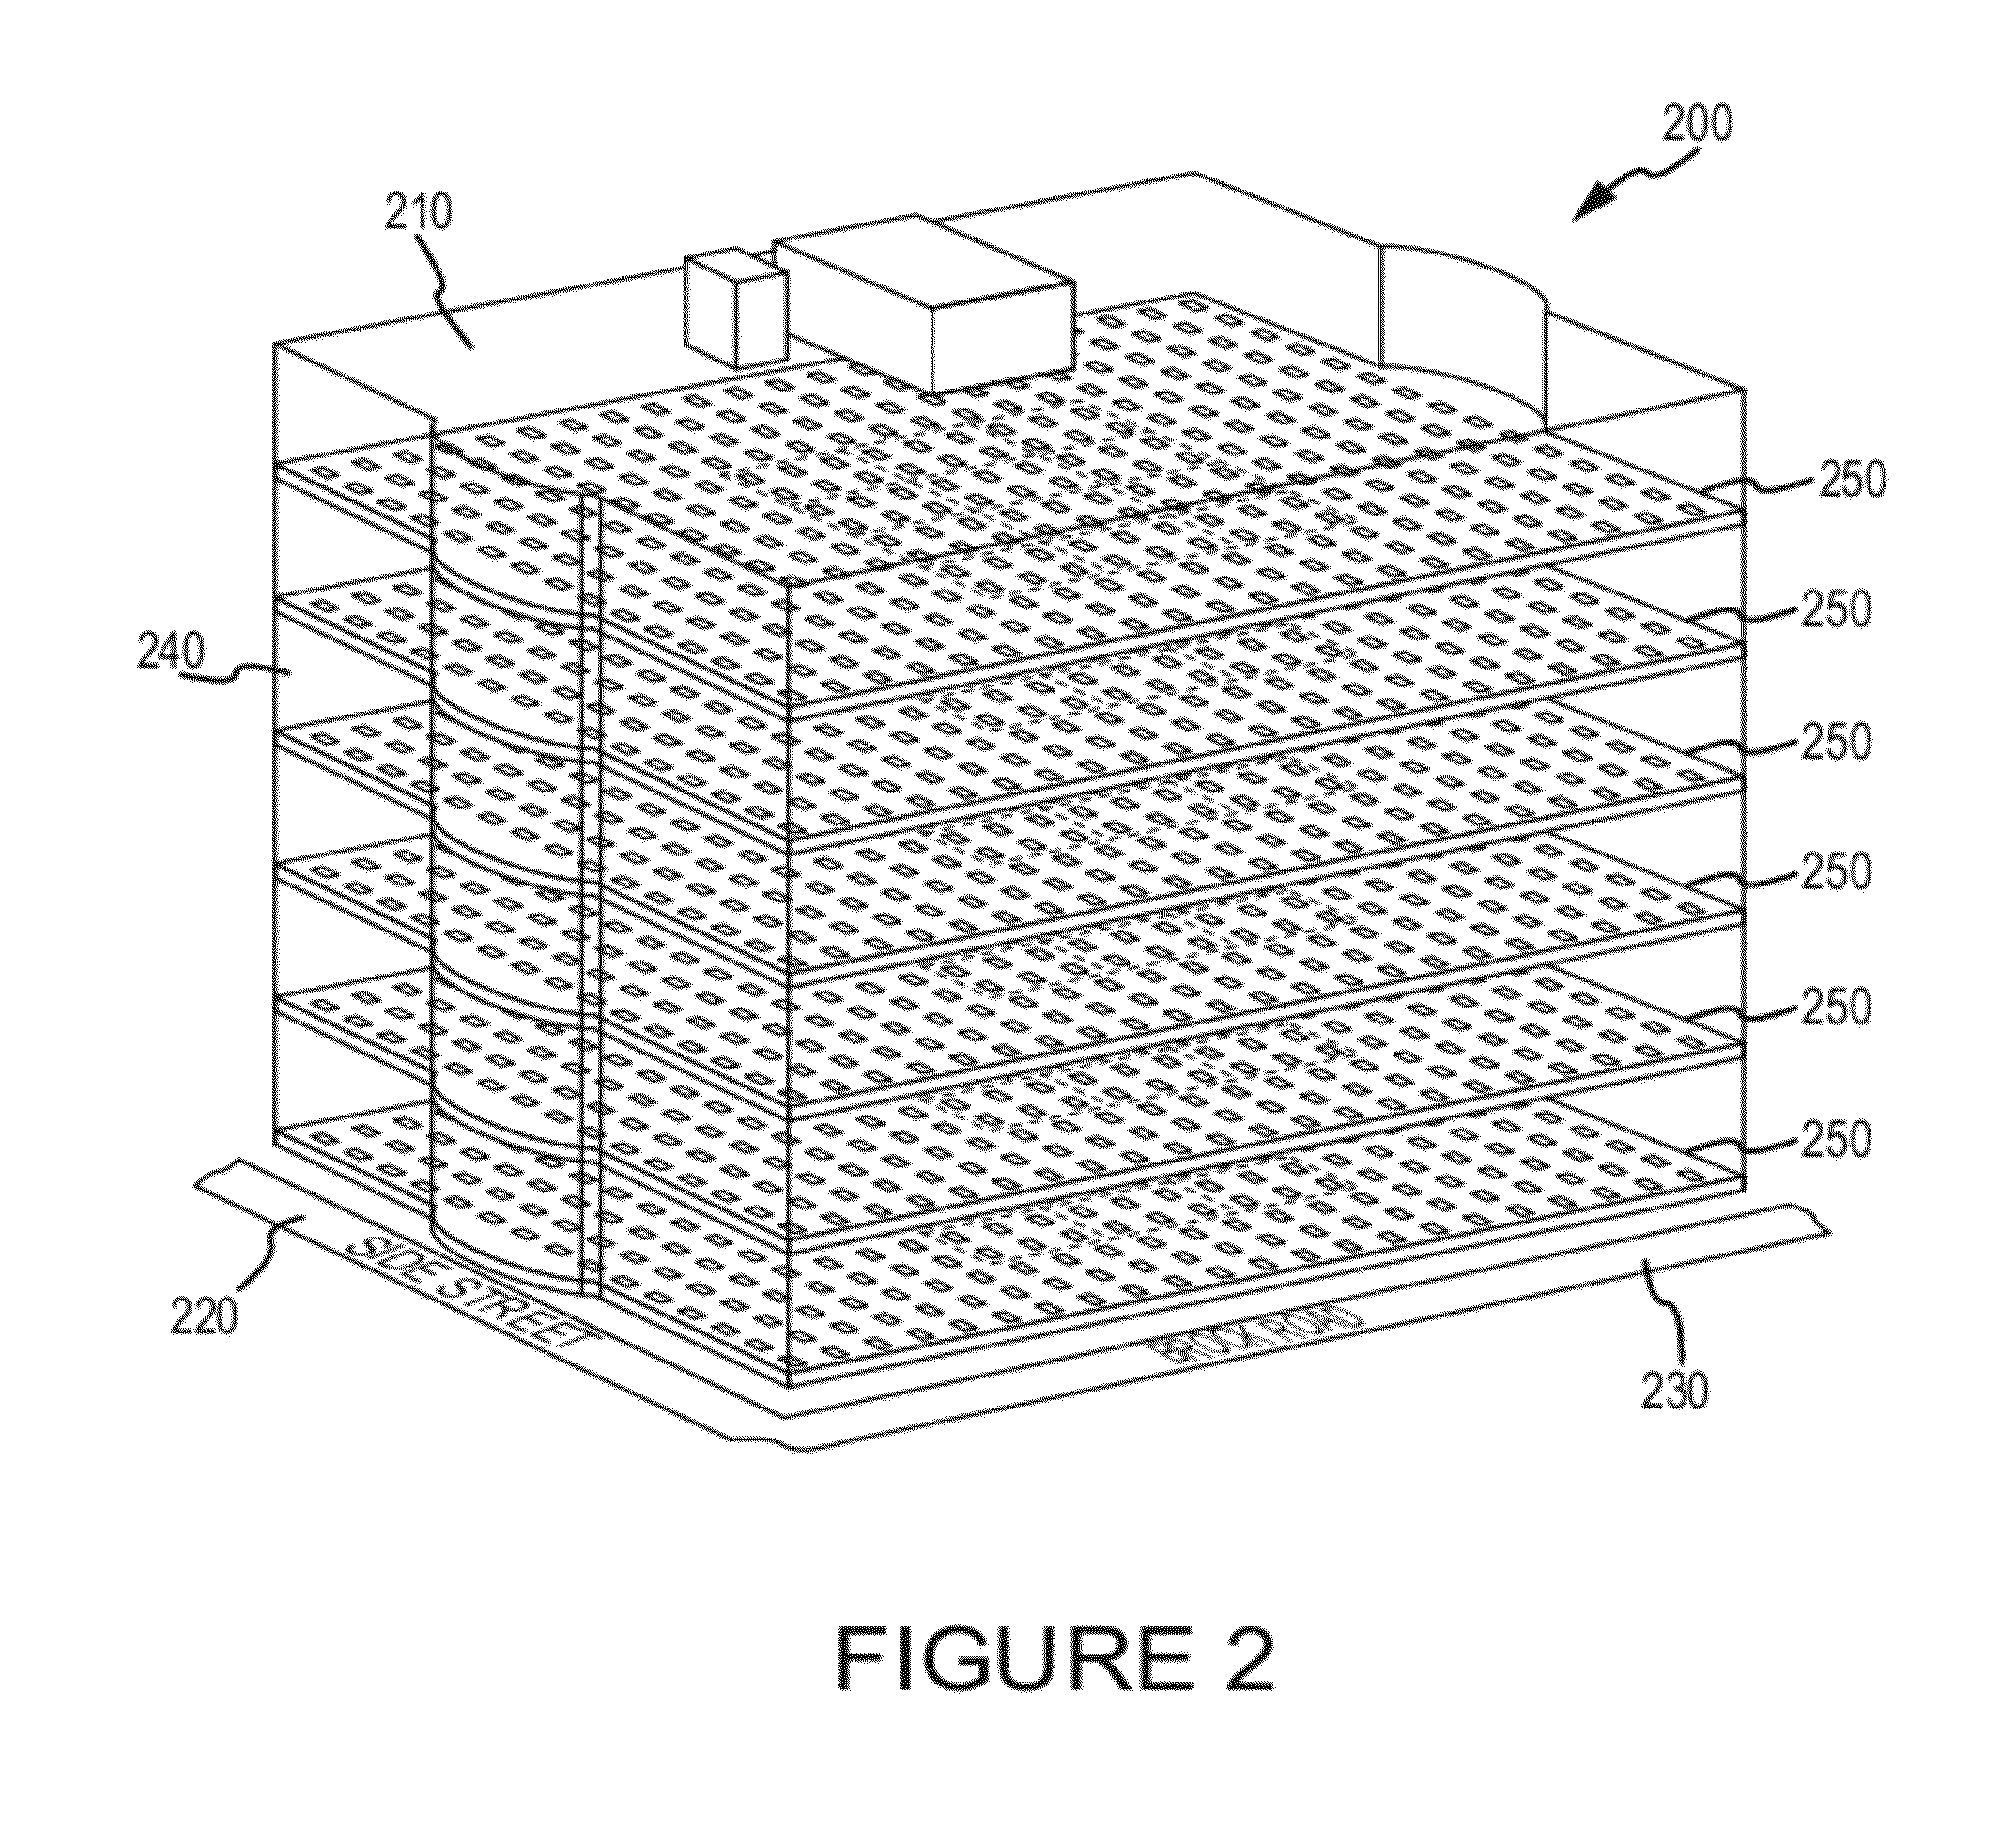 Three dimensional building control system and method